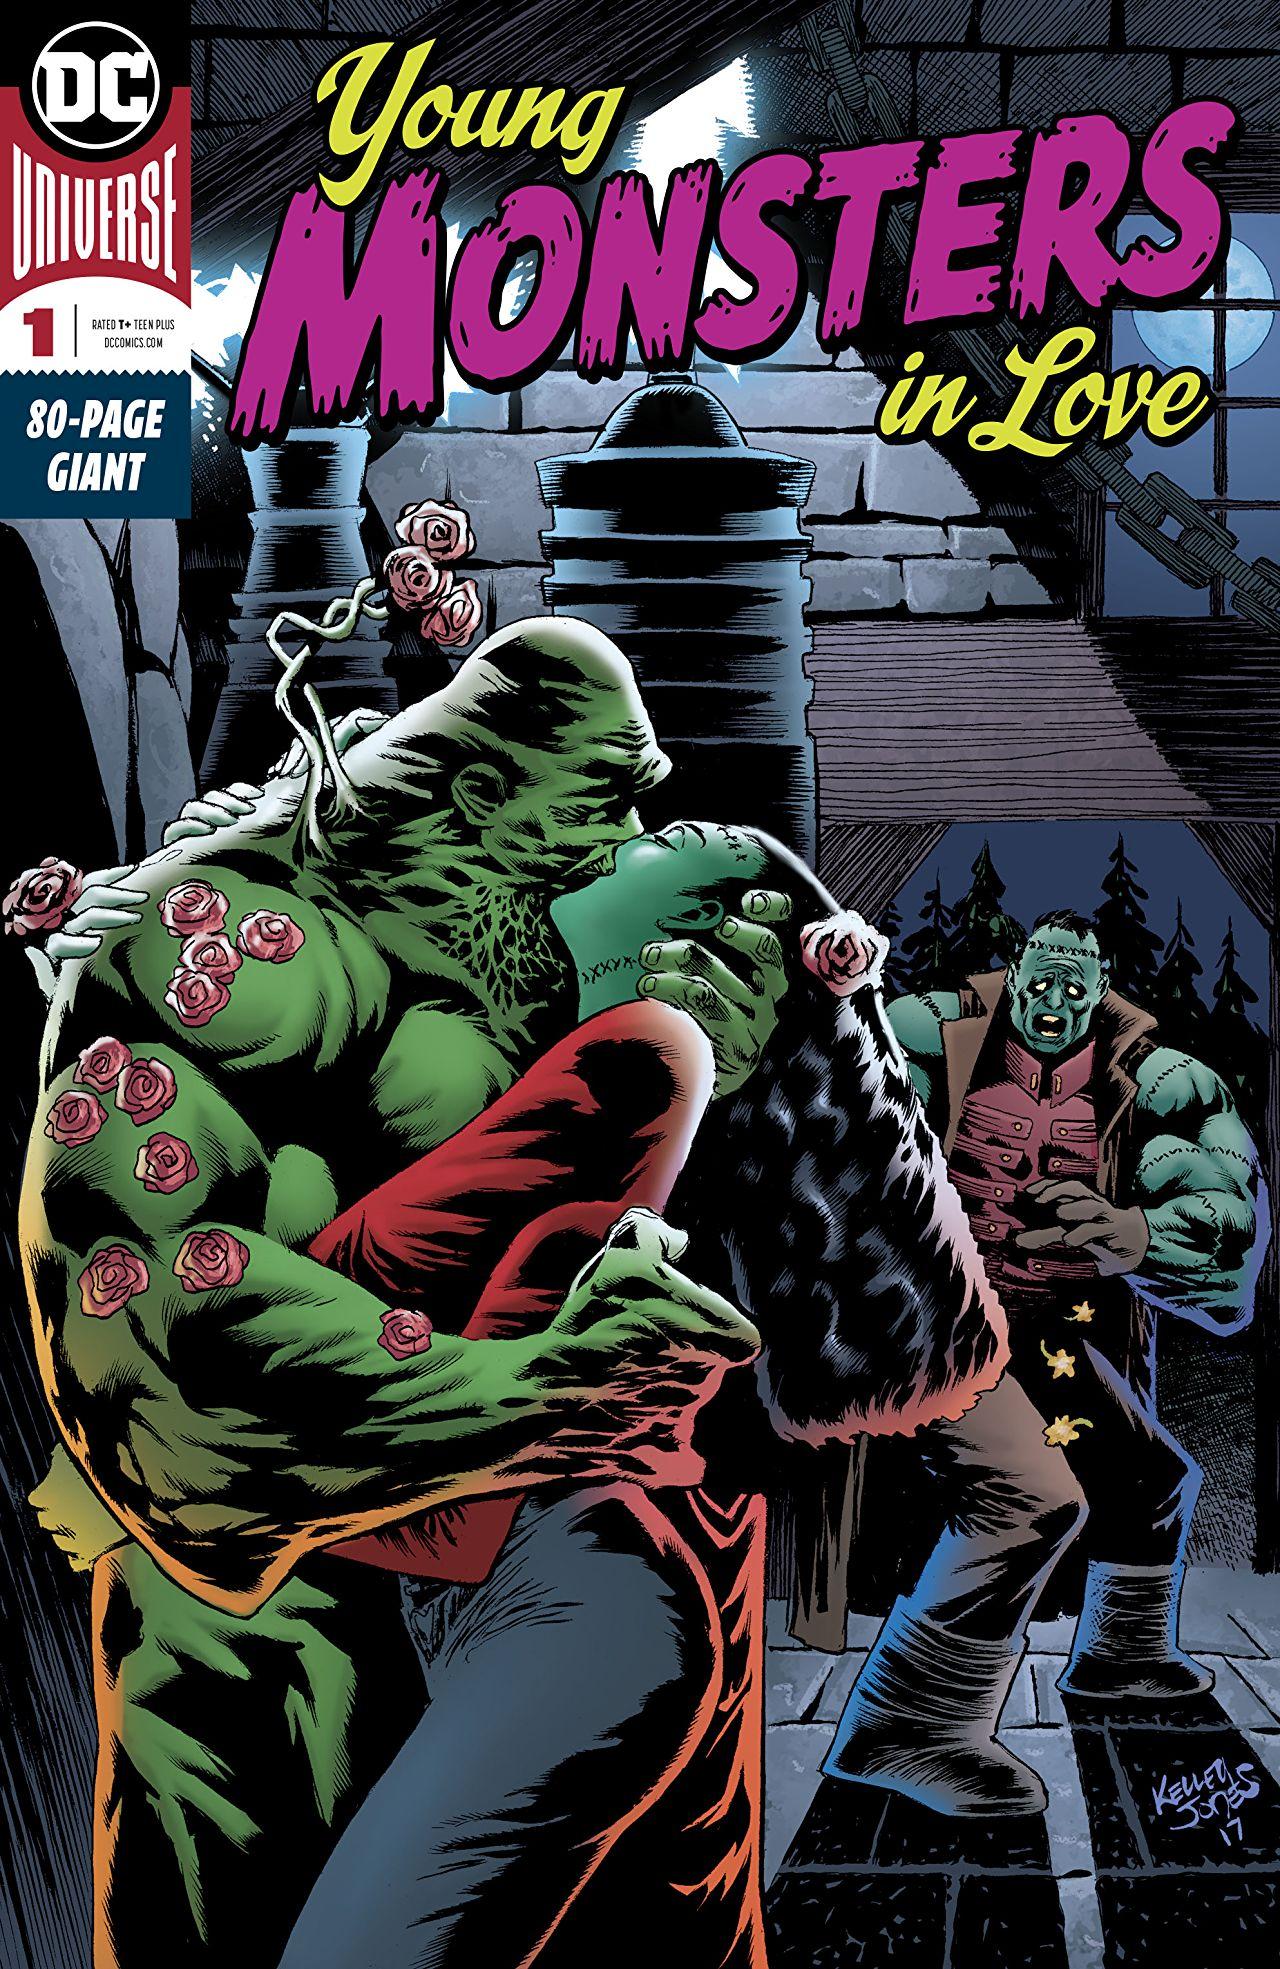 Young Monsters in Love Vol. 1 #1